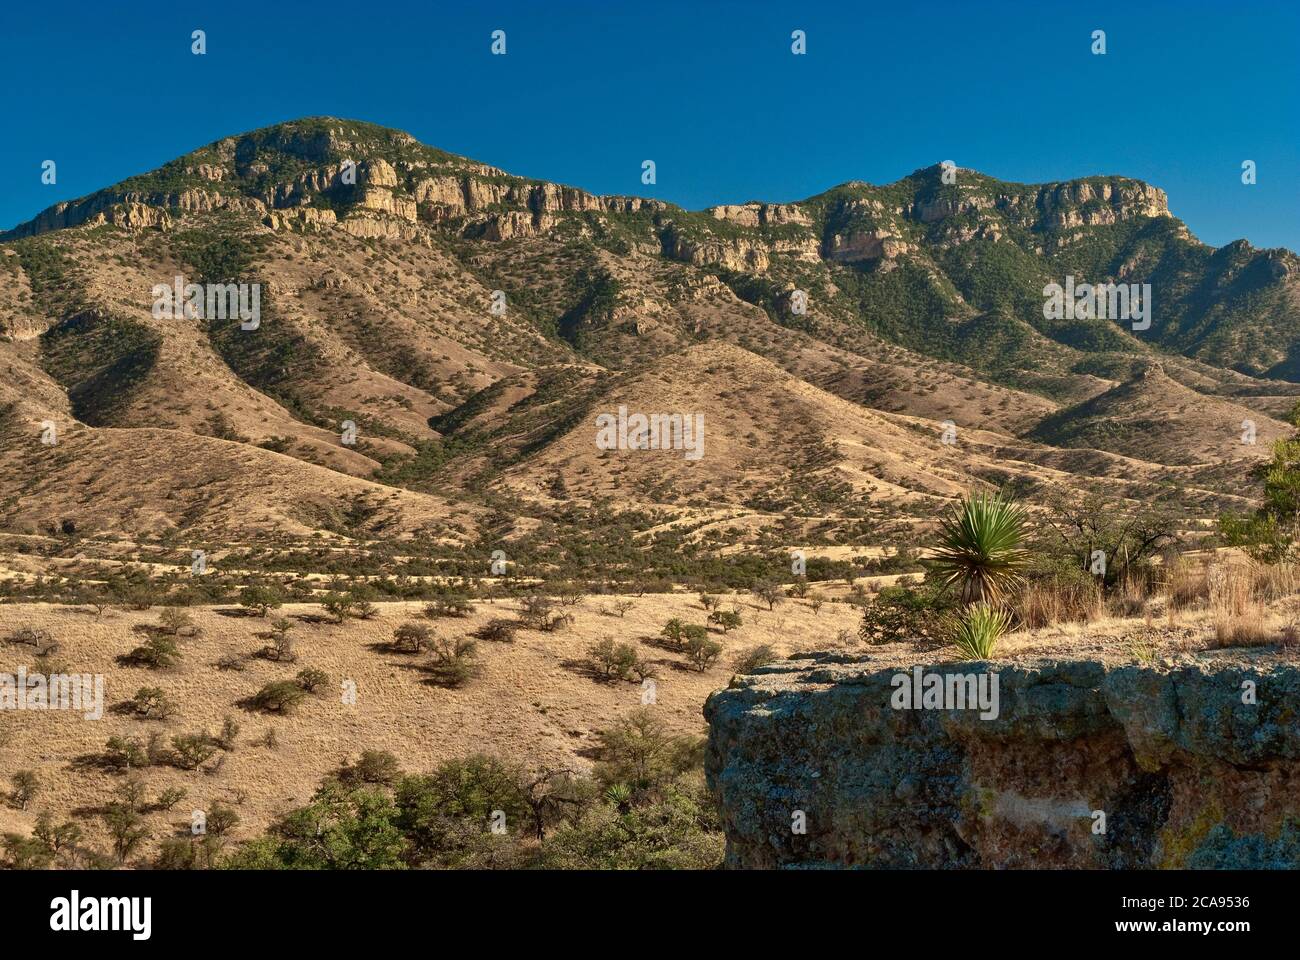 Atascosa Mountains at Sonoran Desert seen from Ruby Road near Mexican border and ghost town of Ruby, Arizona, USA Stock Photo